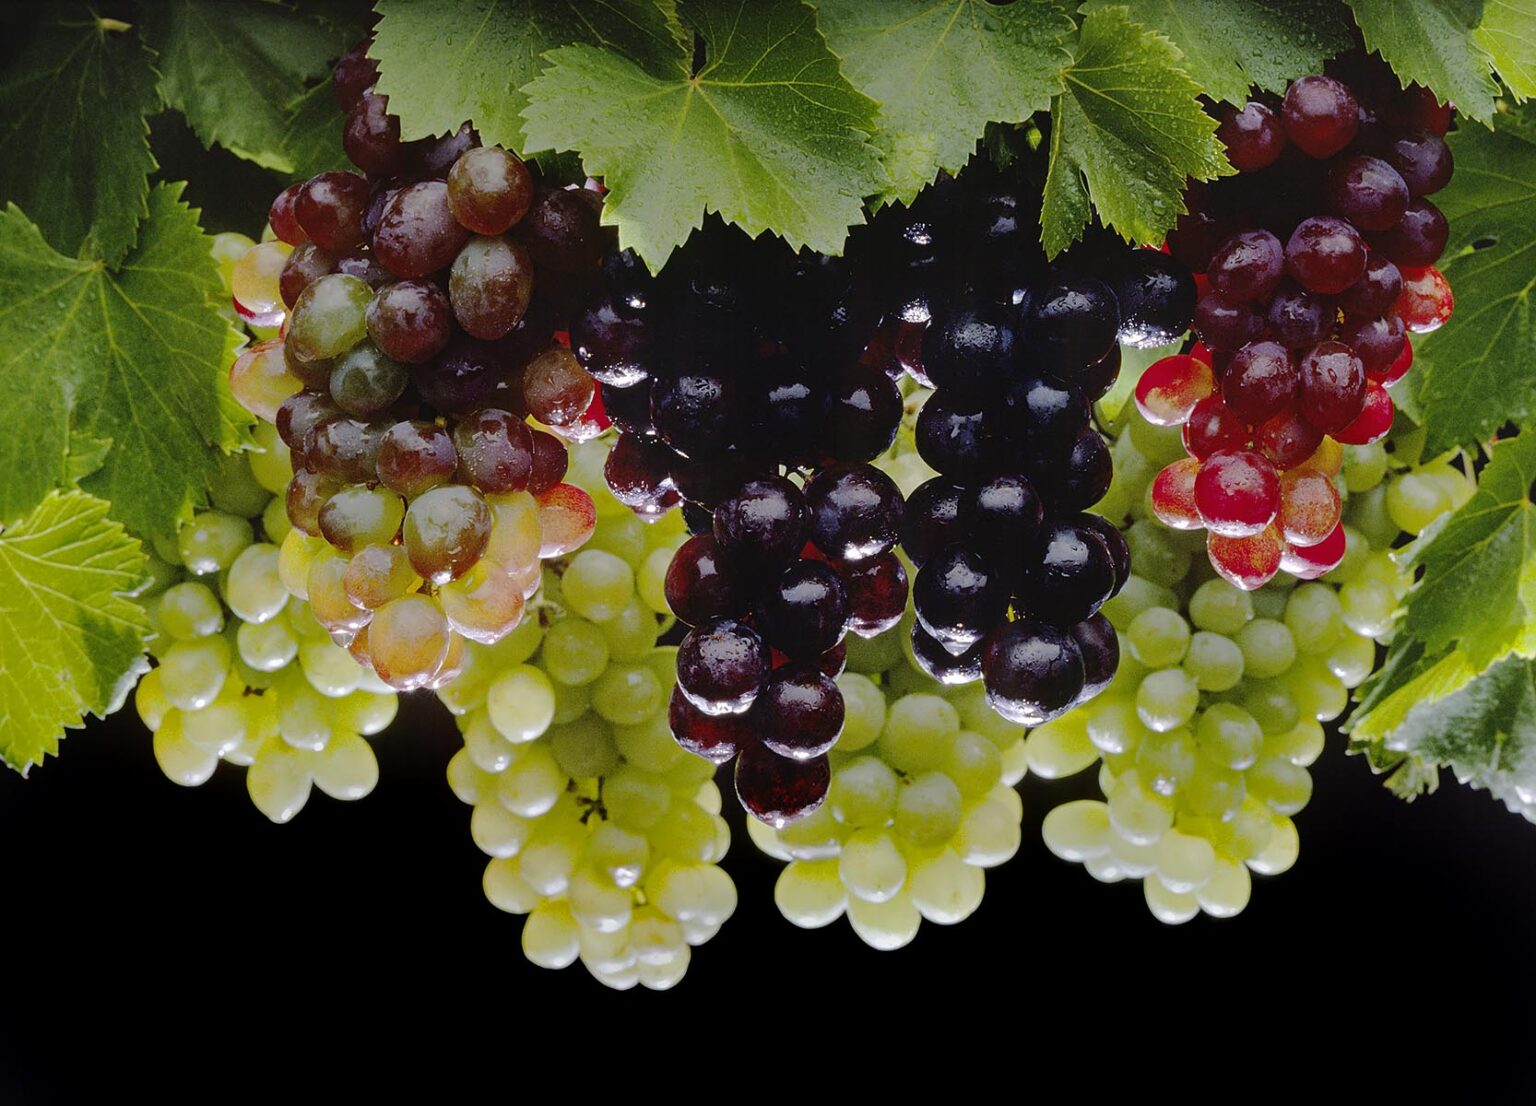 A variety of TABLE GRAPES including red and Thompson seedless